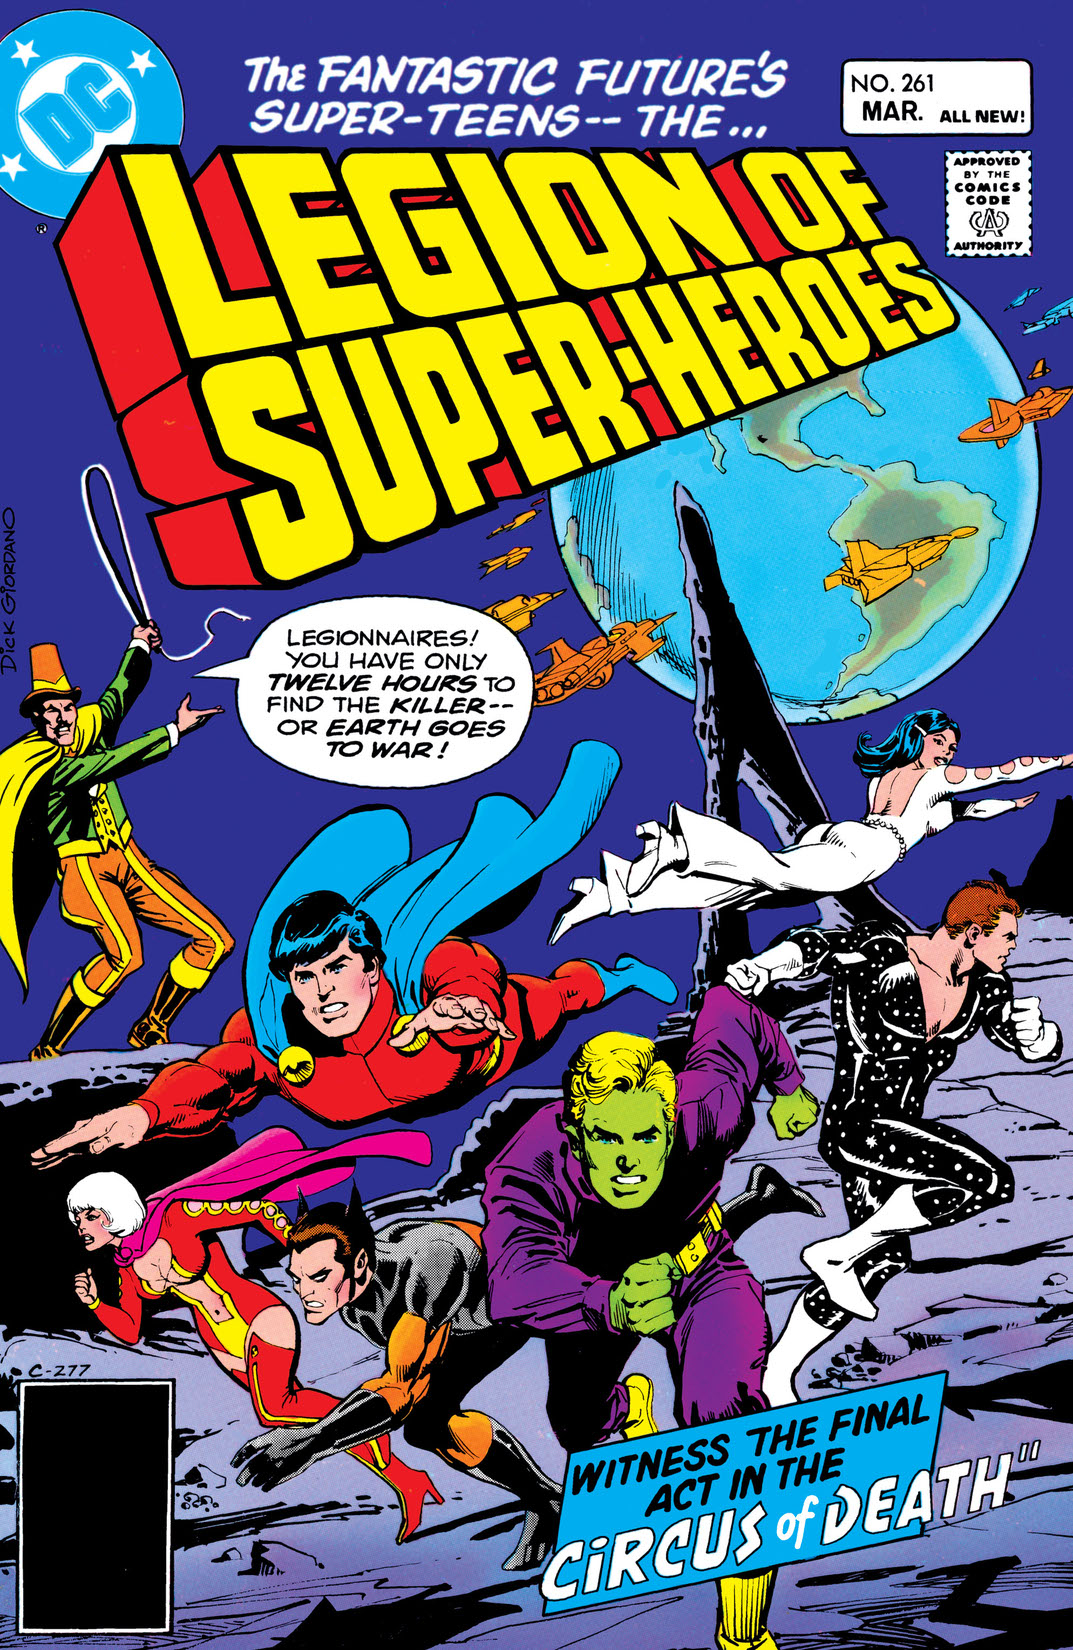 The Legion of Super-Heroes (1980-) #261 preview images